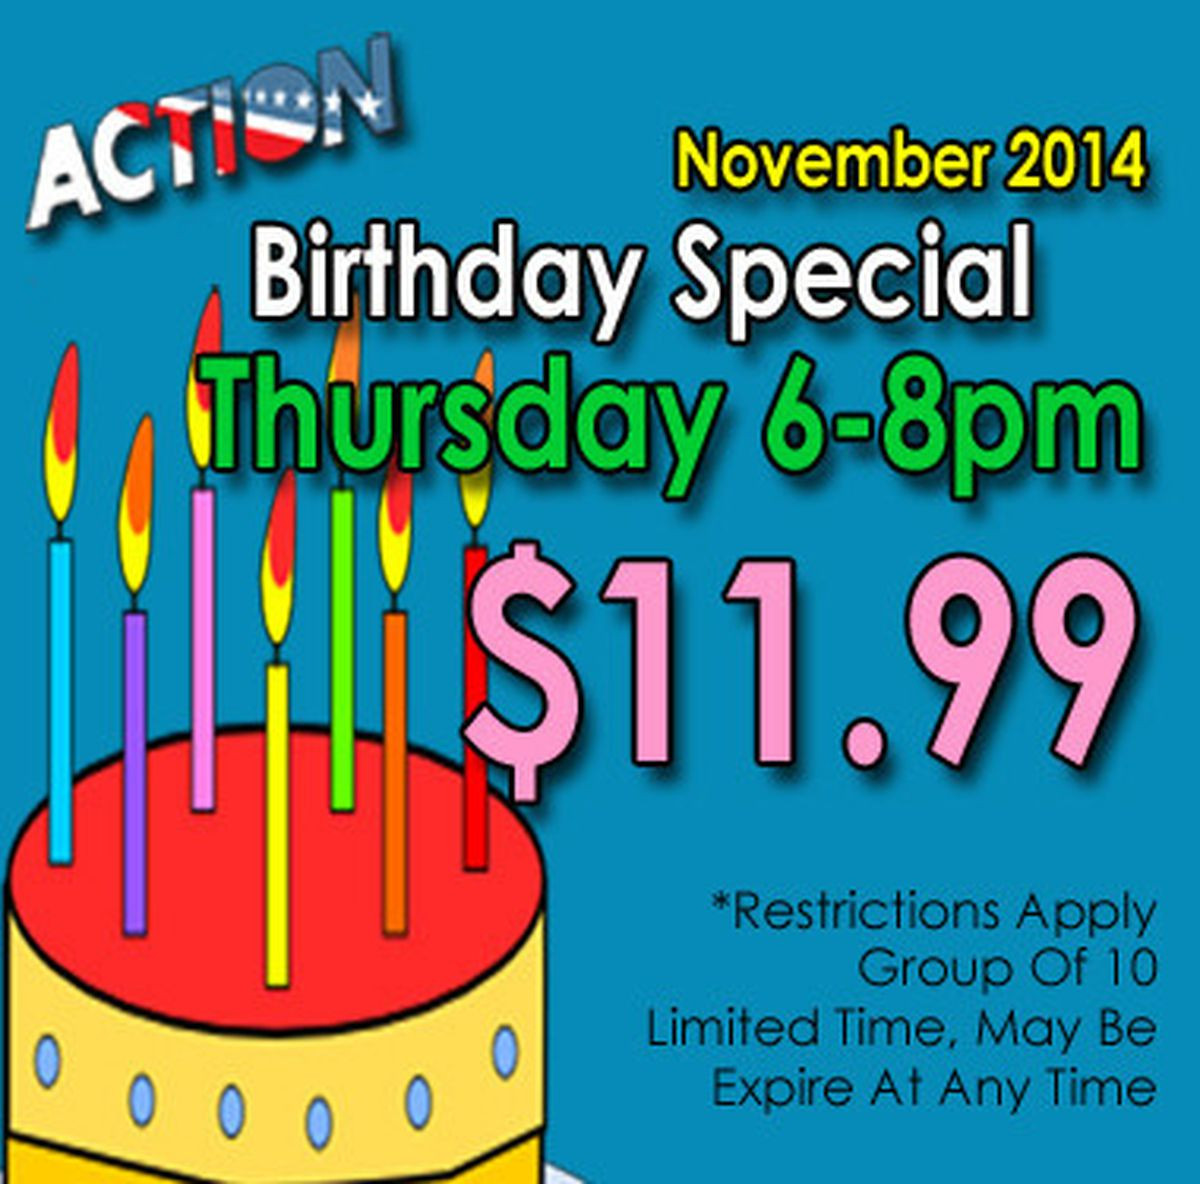 Adult Birthday Party Places
 Area’s Best Birthday Party Place Kids Party Deals Adult